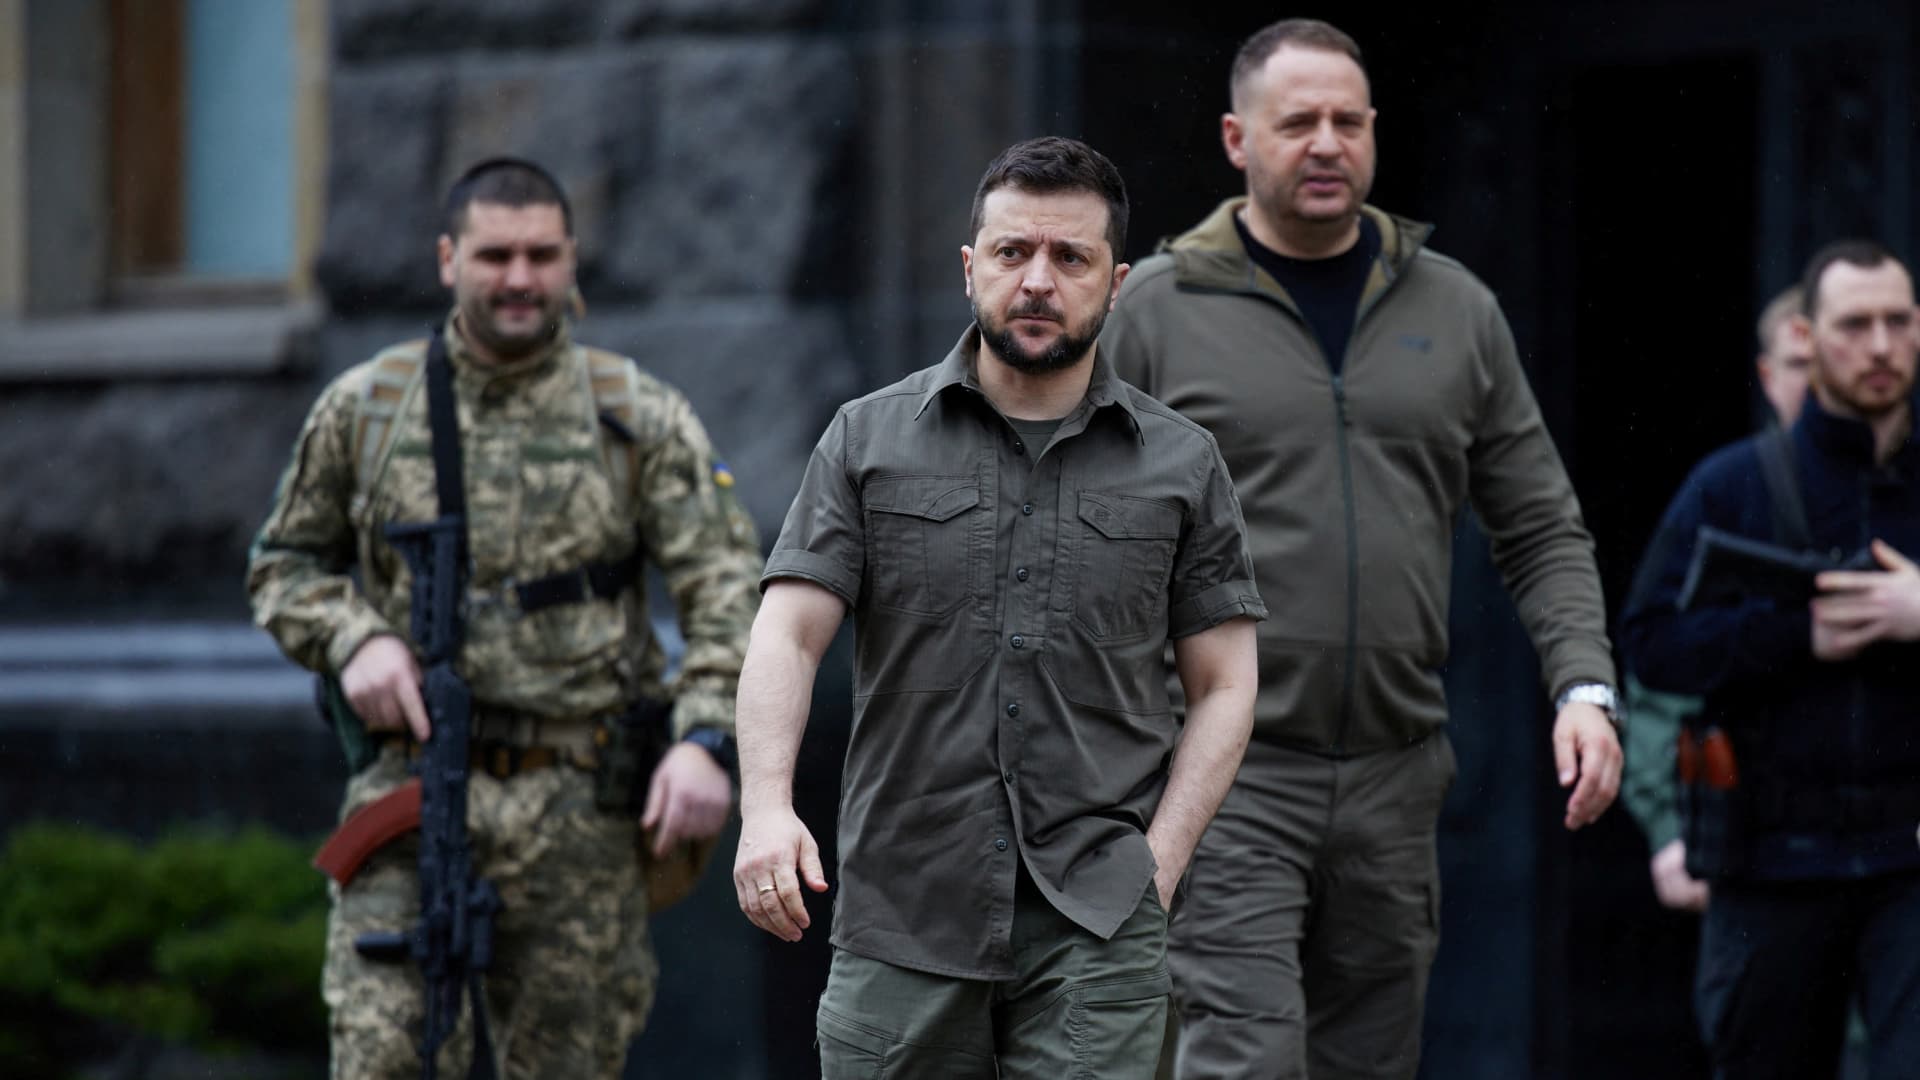 Ukrainian President Volodymyr Zelenskyy arrives for a meeting with Austrian Chancellor Karl Nehammer, as Russia's attack on Ukraine continues, in Kyiv, Ukraine April 9, 2022.